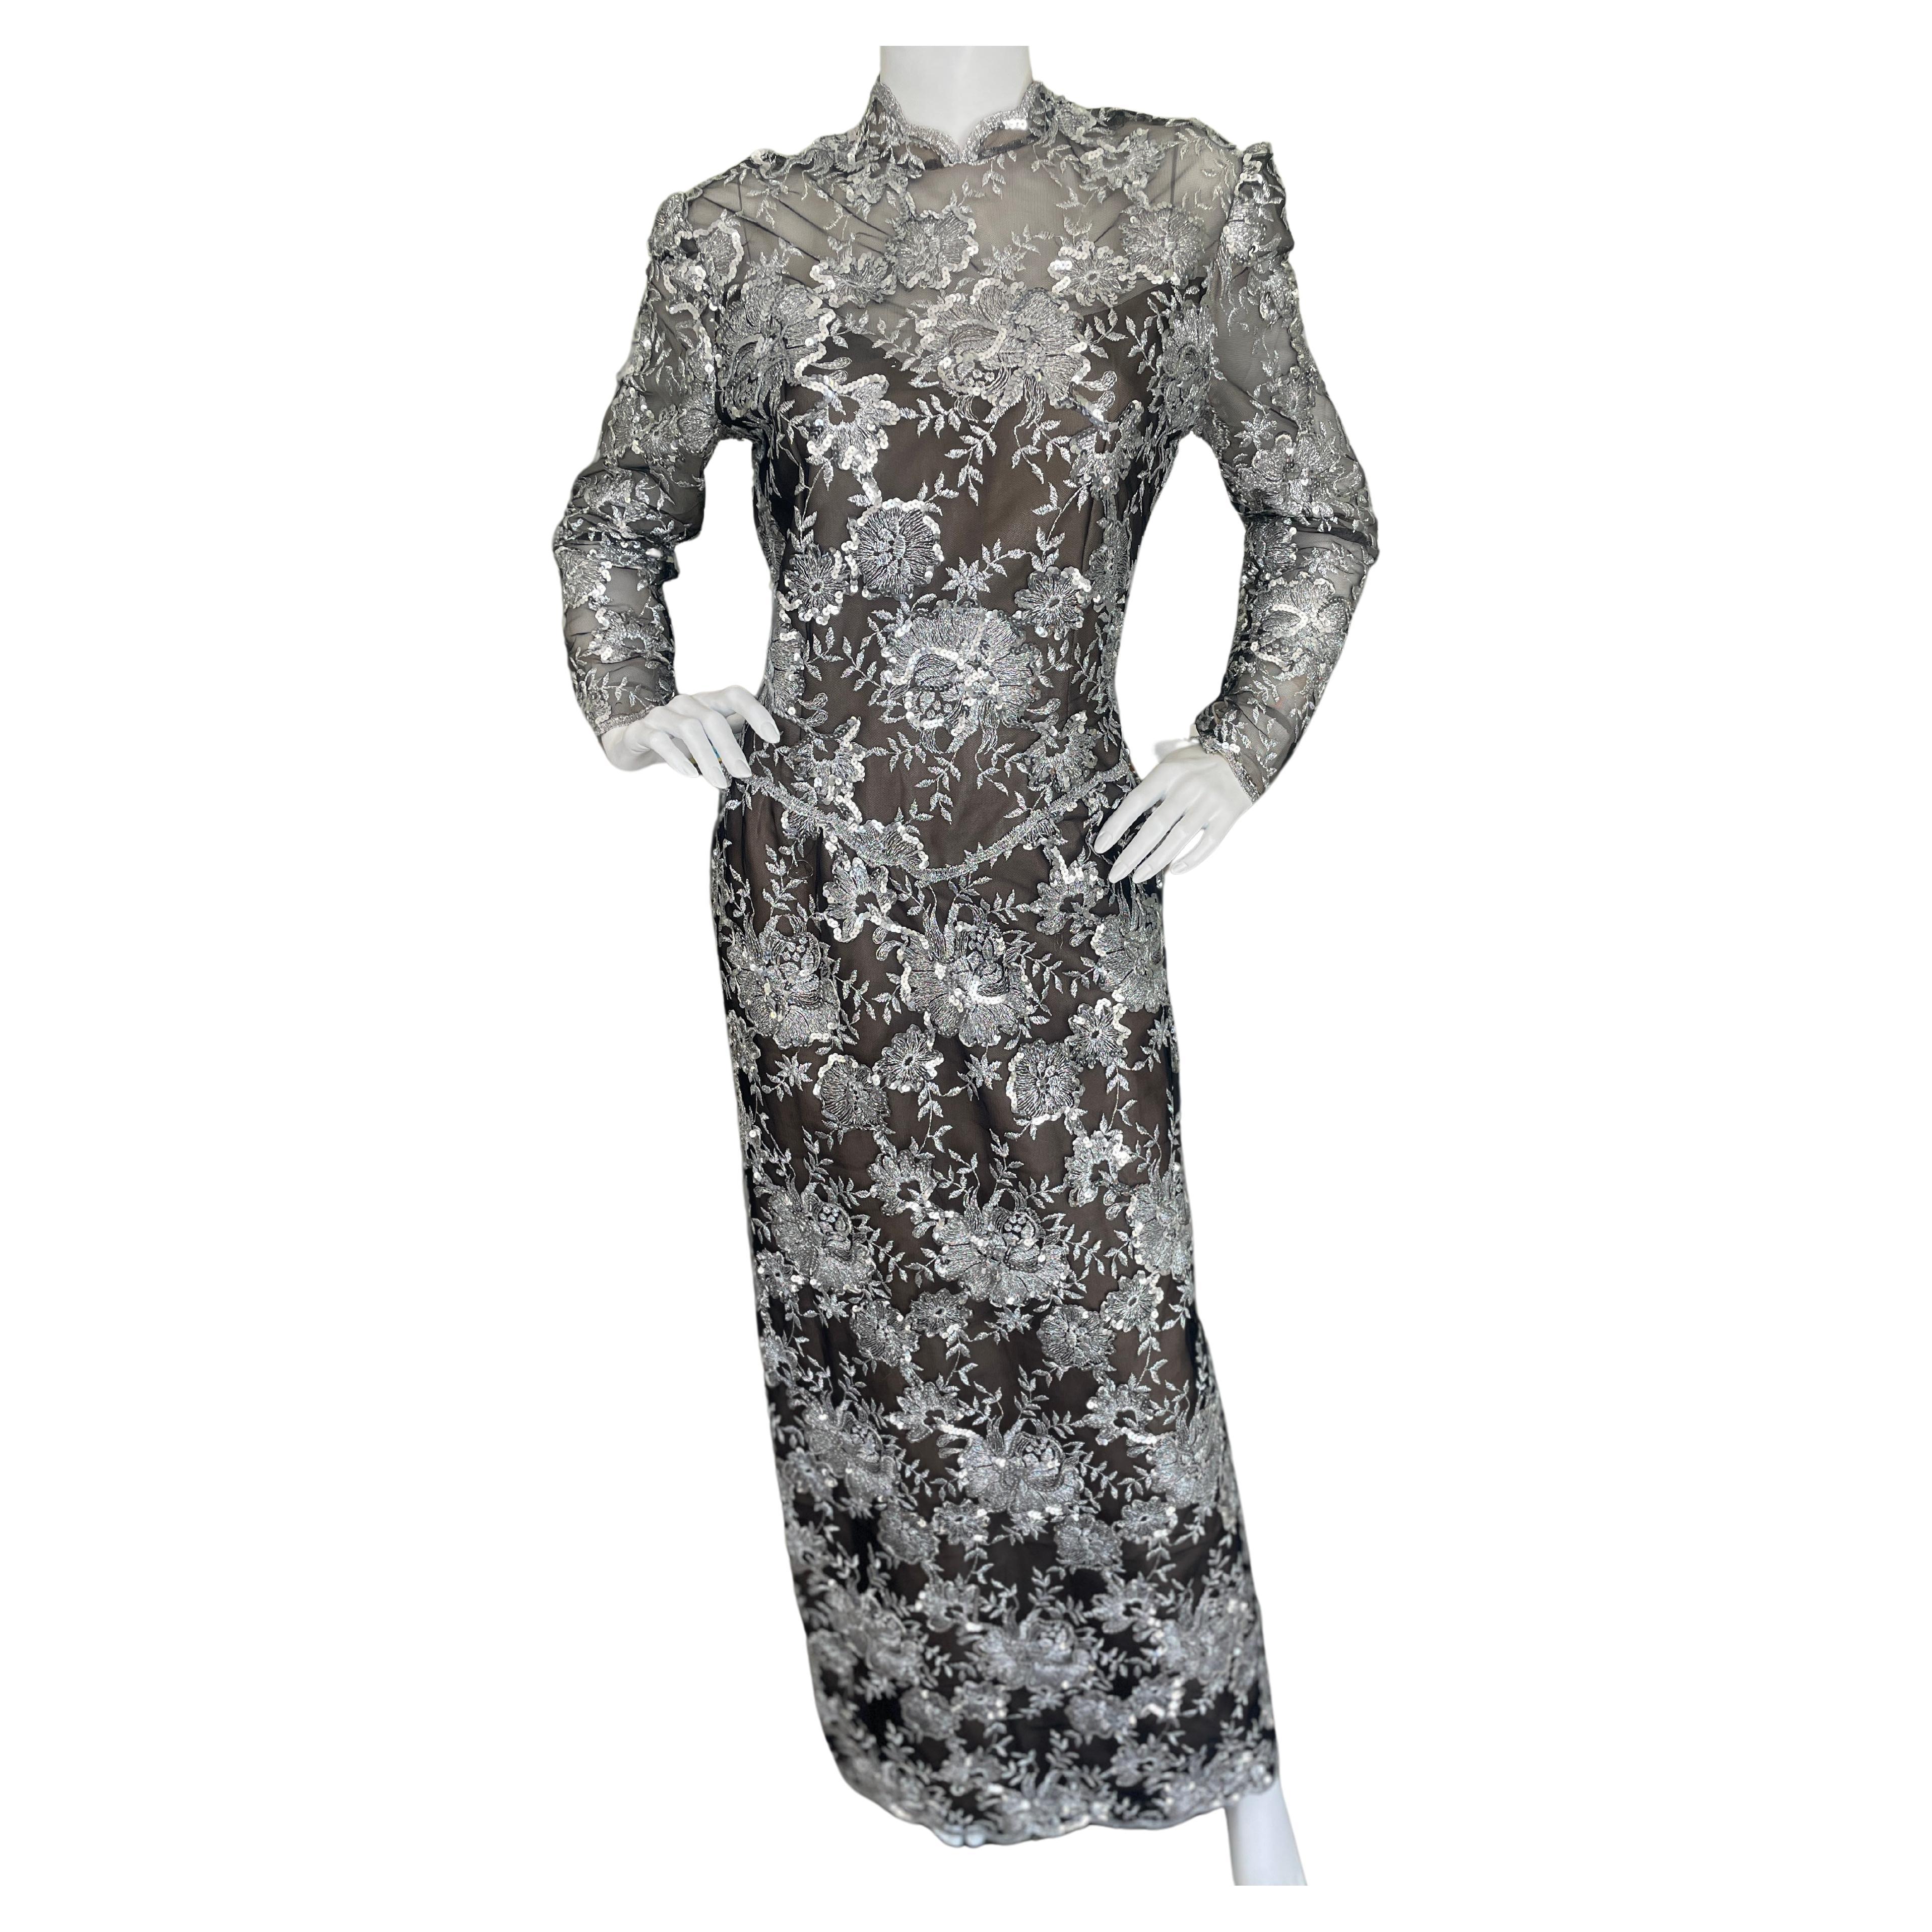 Victor Costa Vintage 1980's Embroidered Sequined Silver Lace Evening Dress For Sale